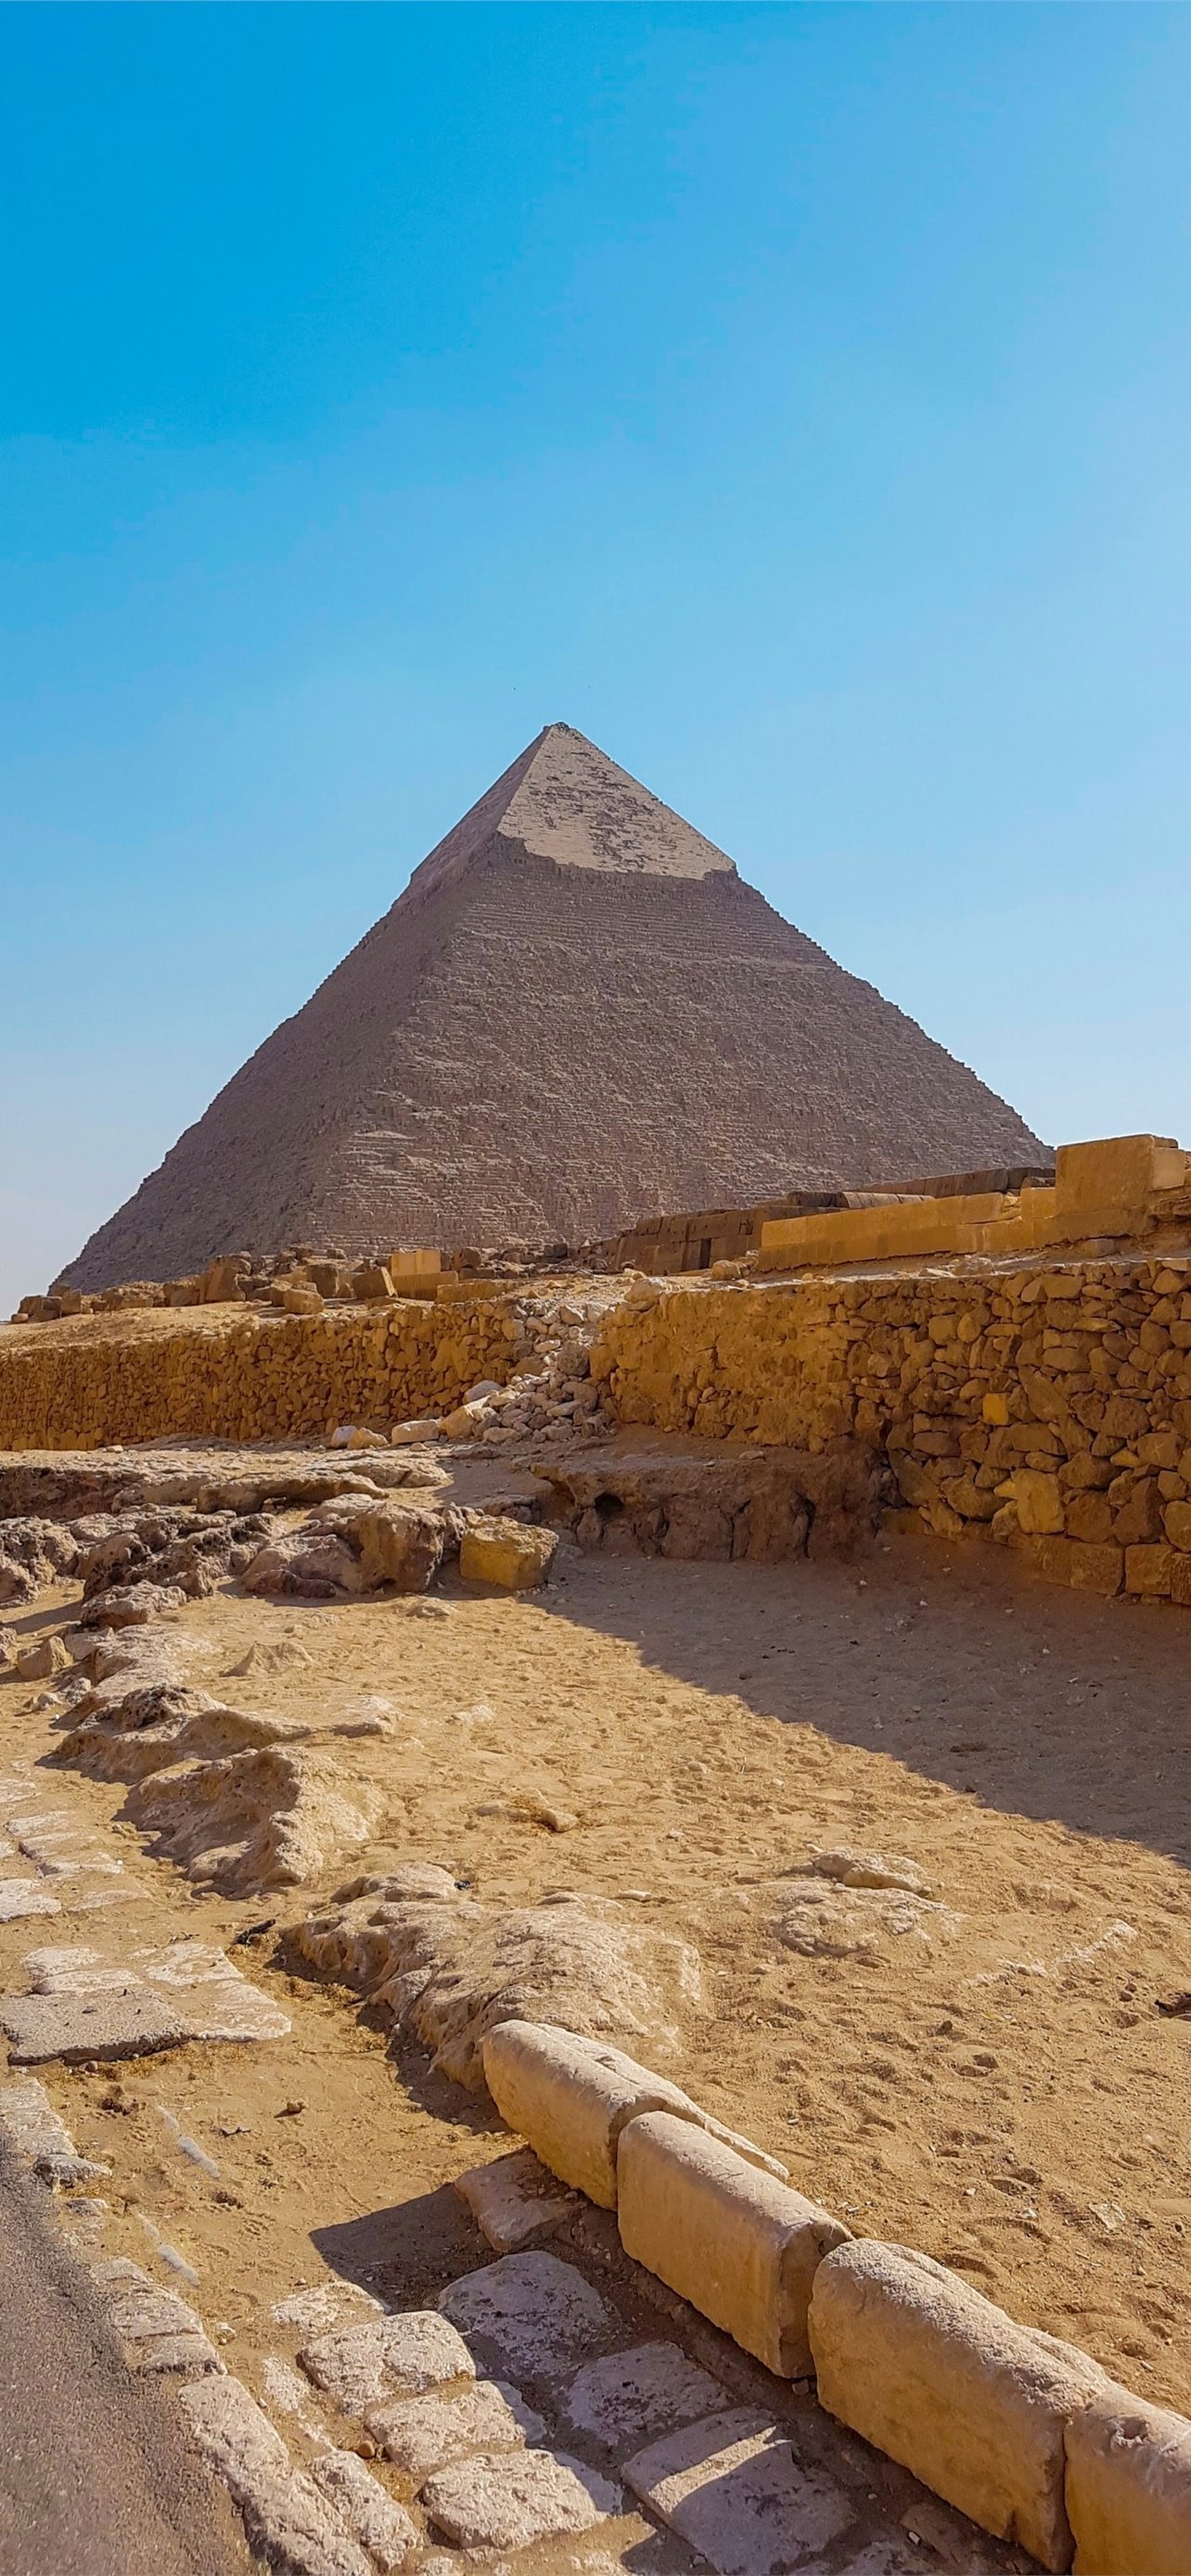 Pyramids of Giza, Best iPhone HD wallpapers, Pyramid admiration, Ancient marvels, 1290x2780 HD Handy